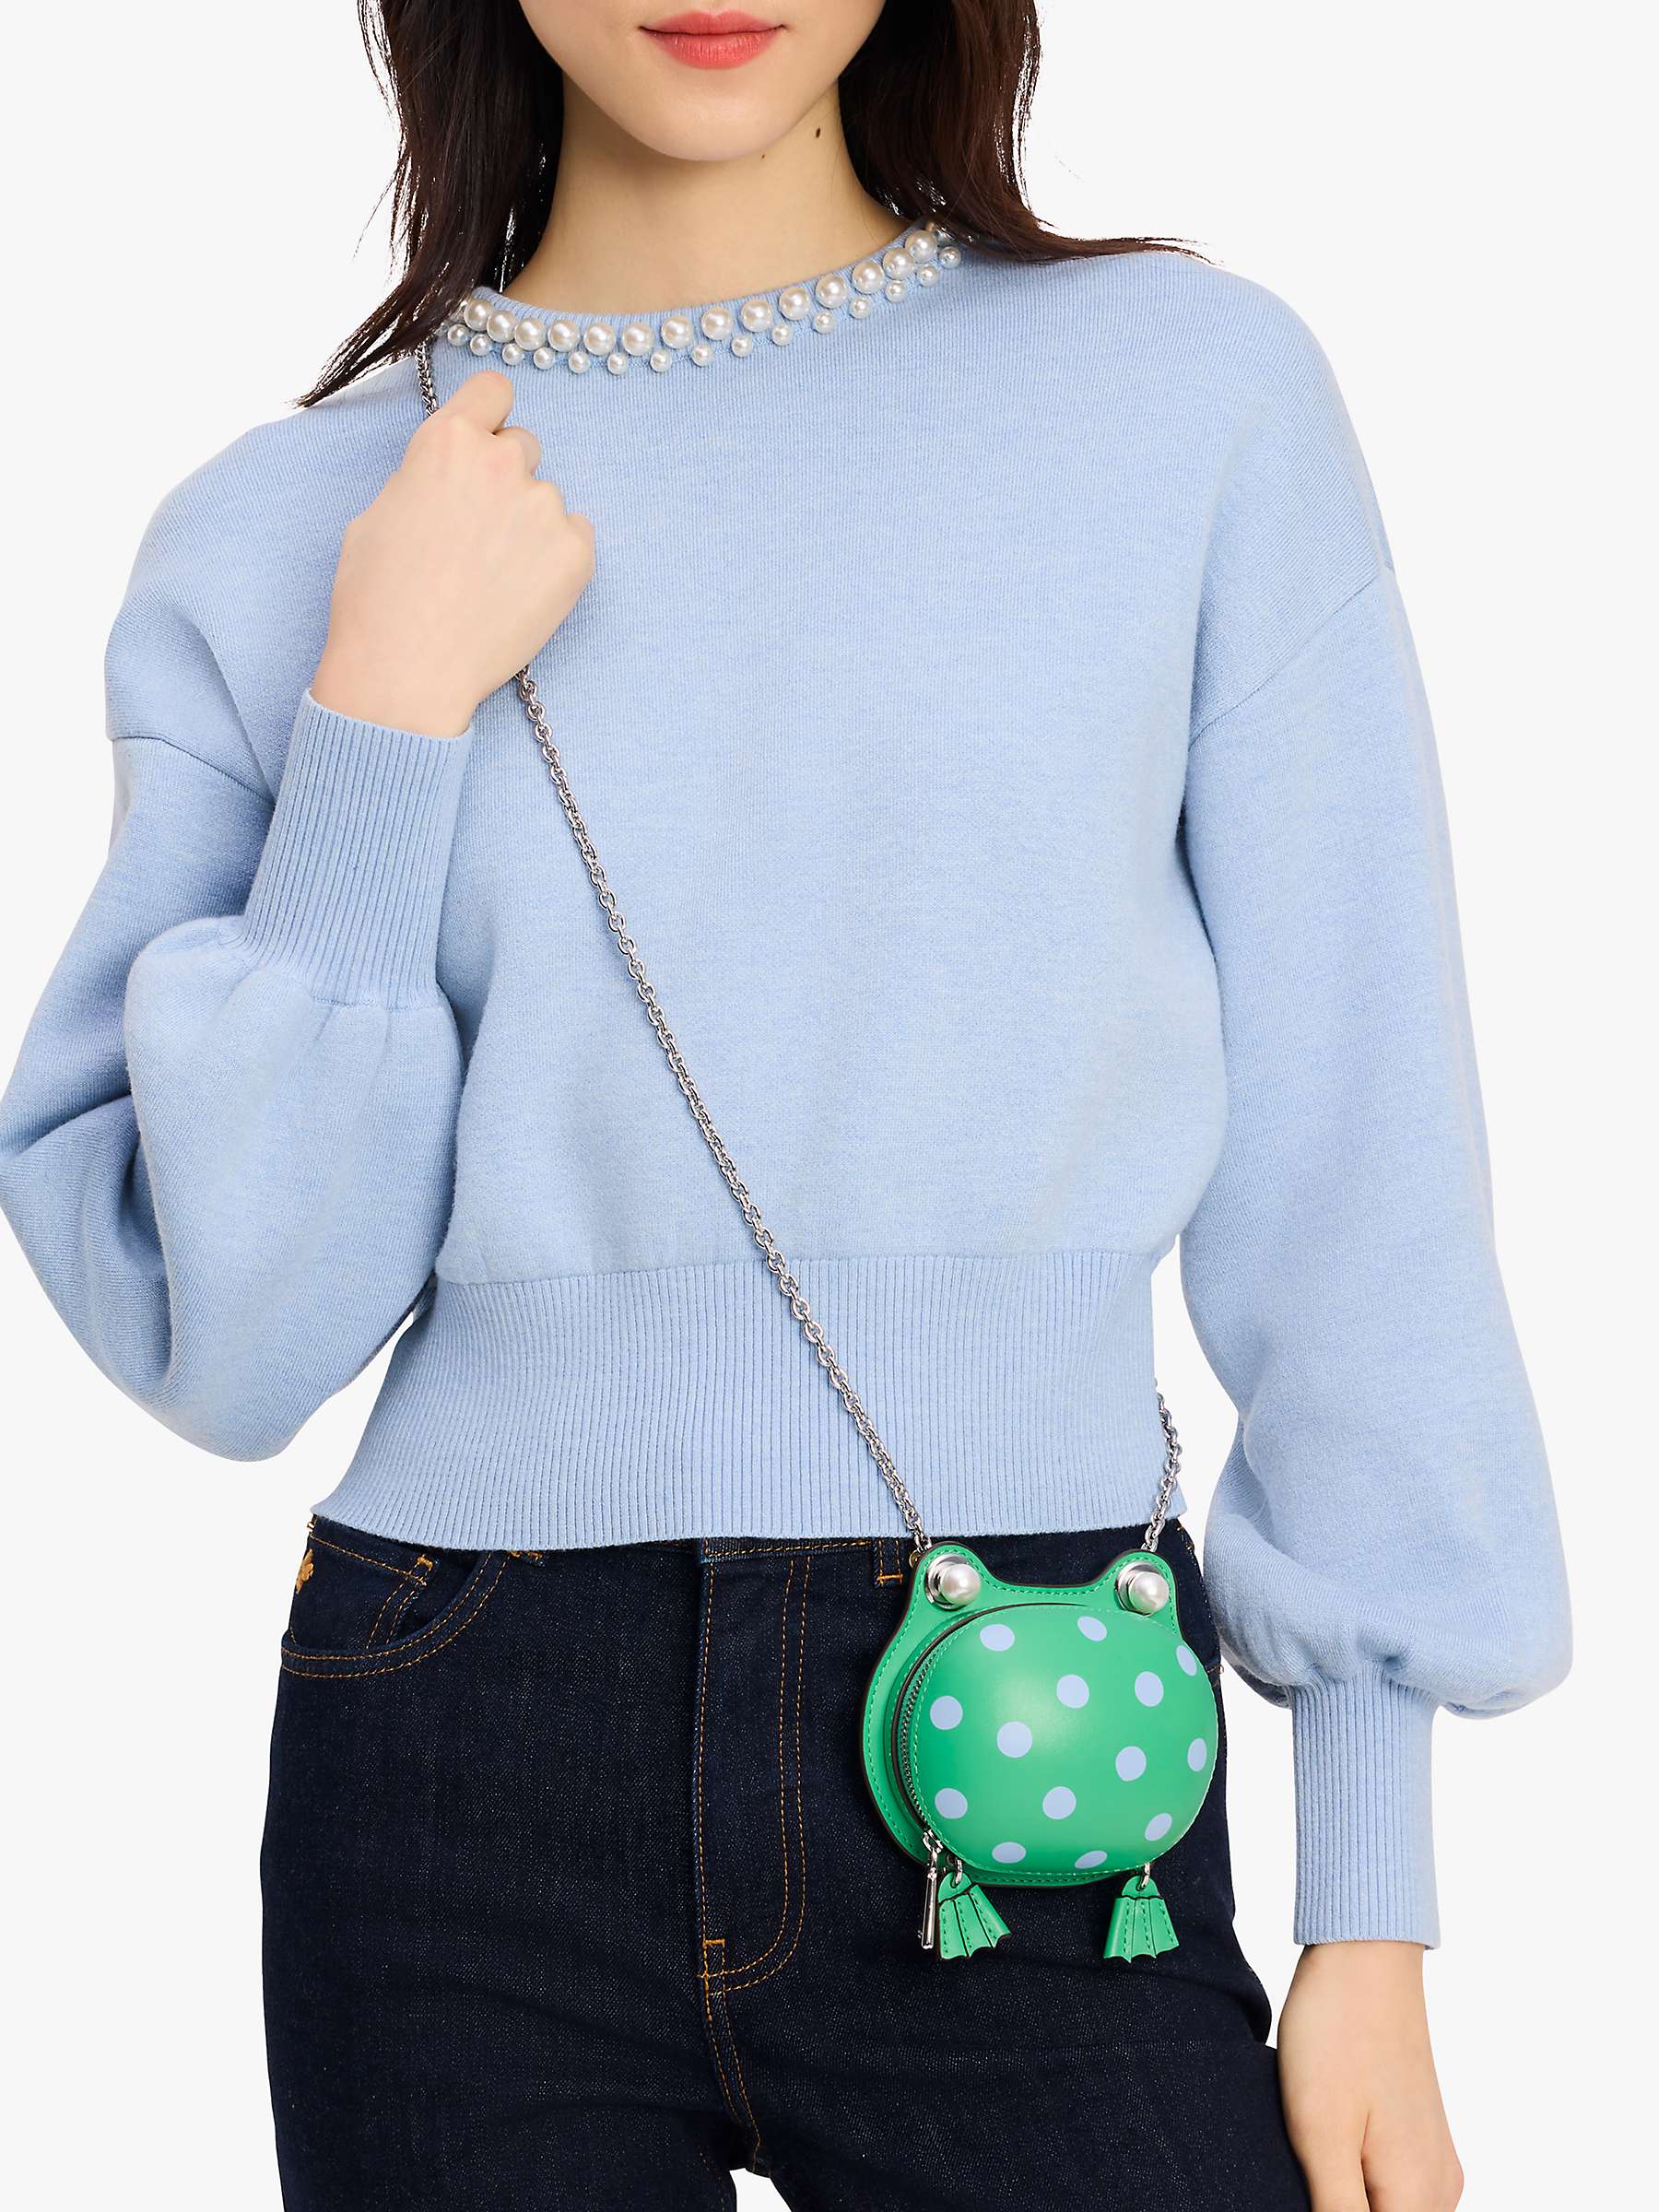 Buy kate spade new york Lily Frog Leather Cross Body Bag, Candy Grass Online at johnlewis.com